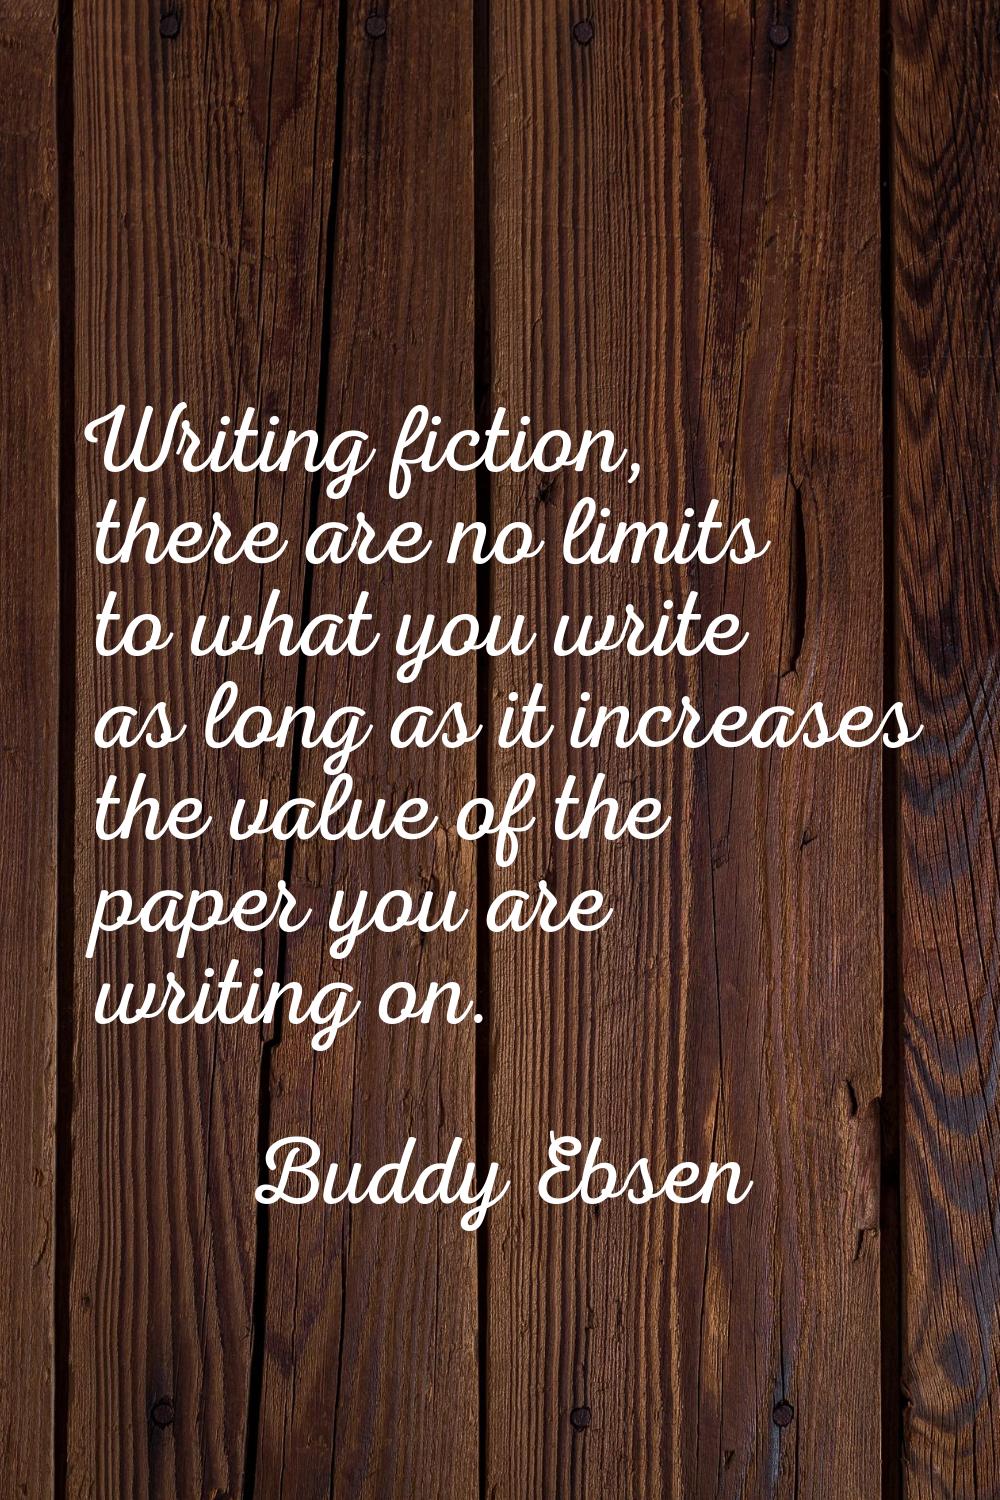 Writing fiction, there are no limits to what you write as long as it increases the value of the pap